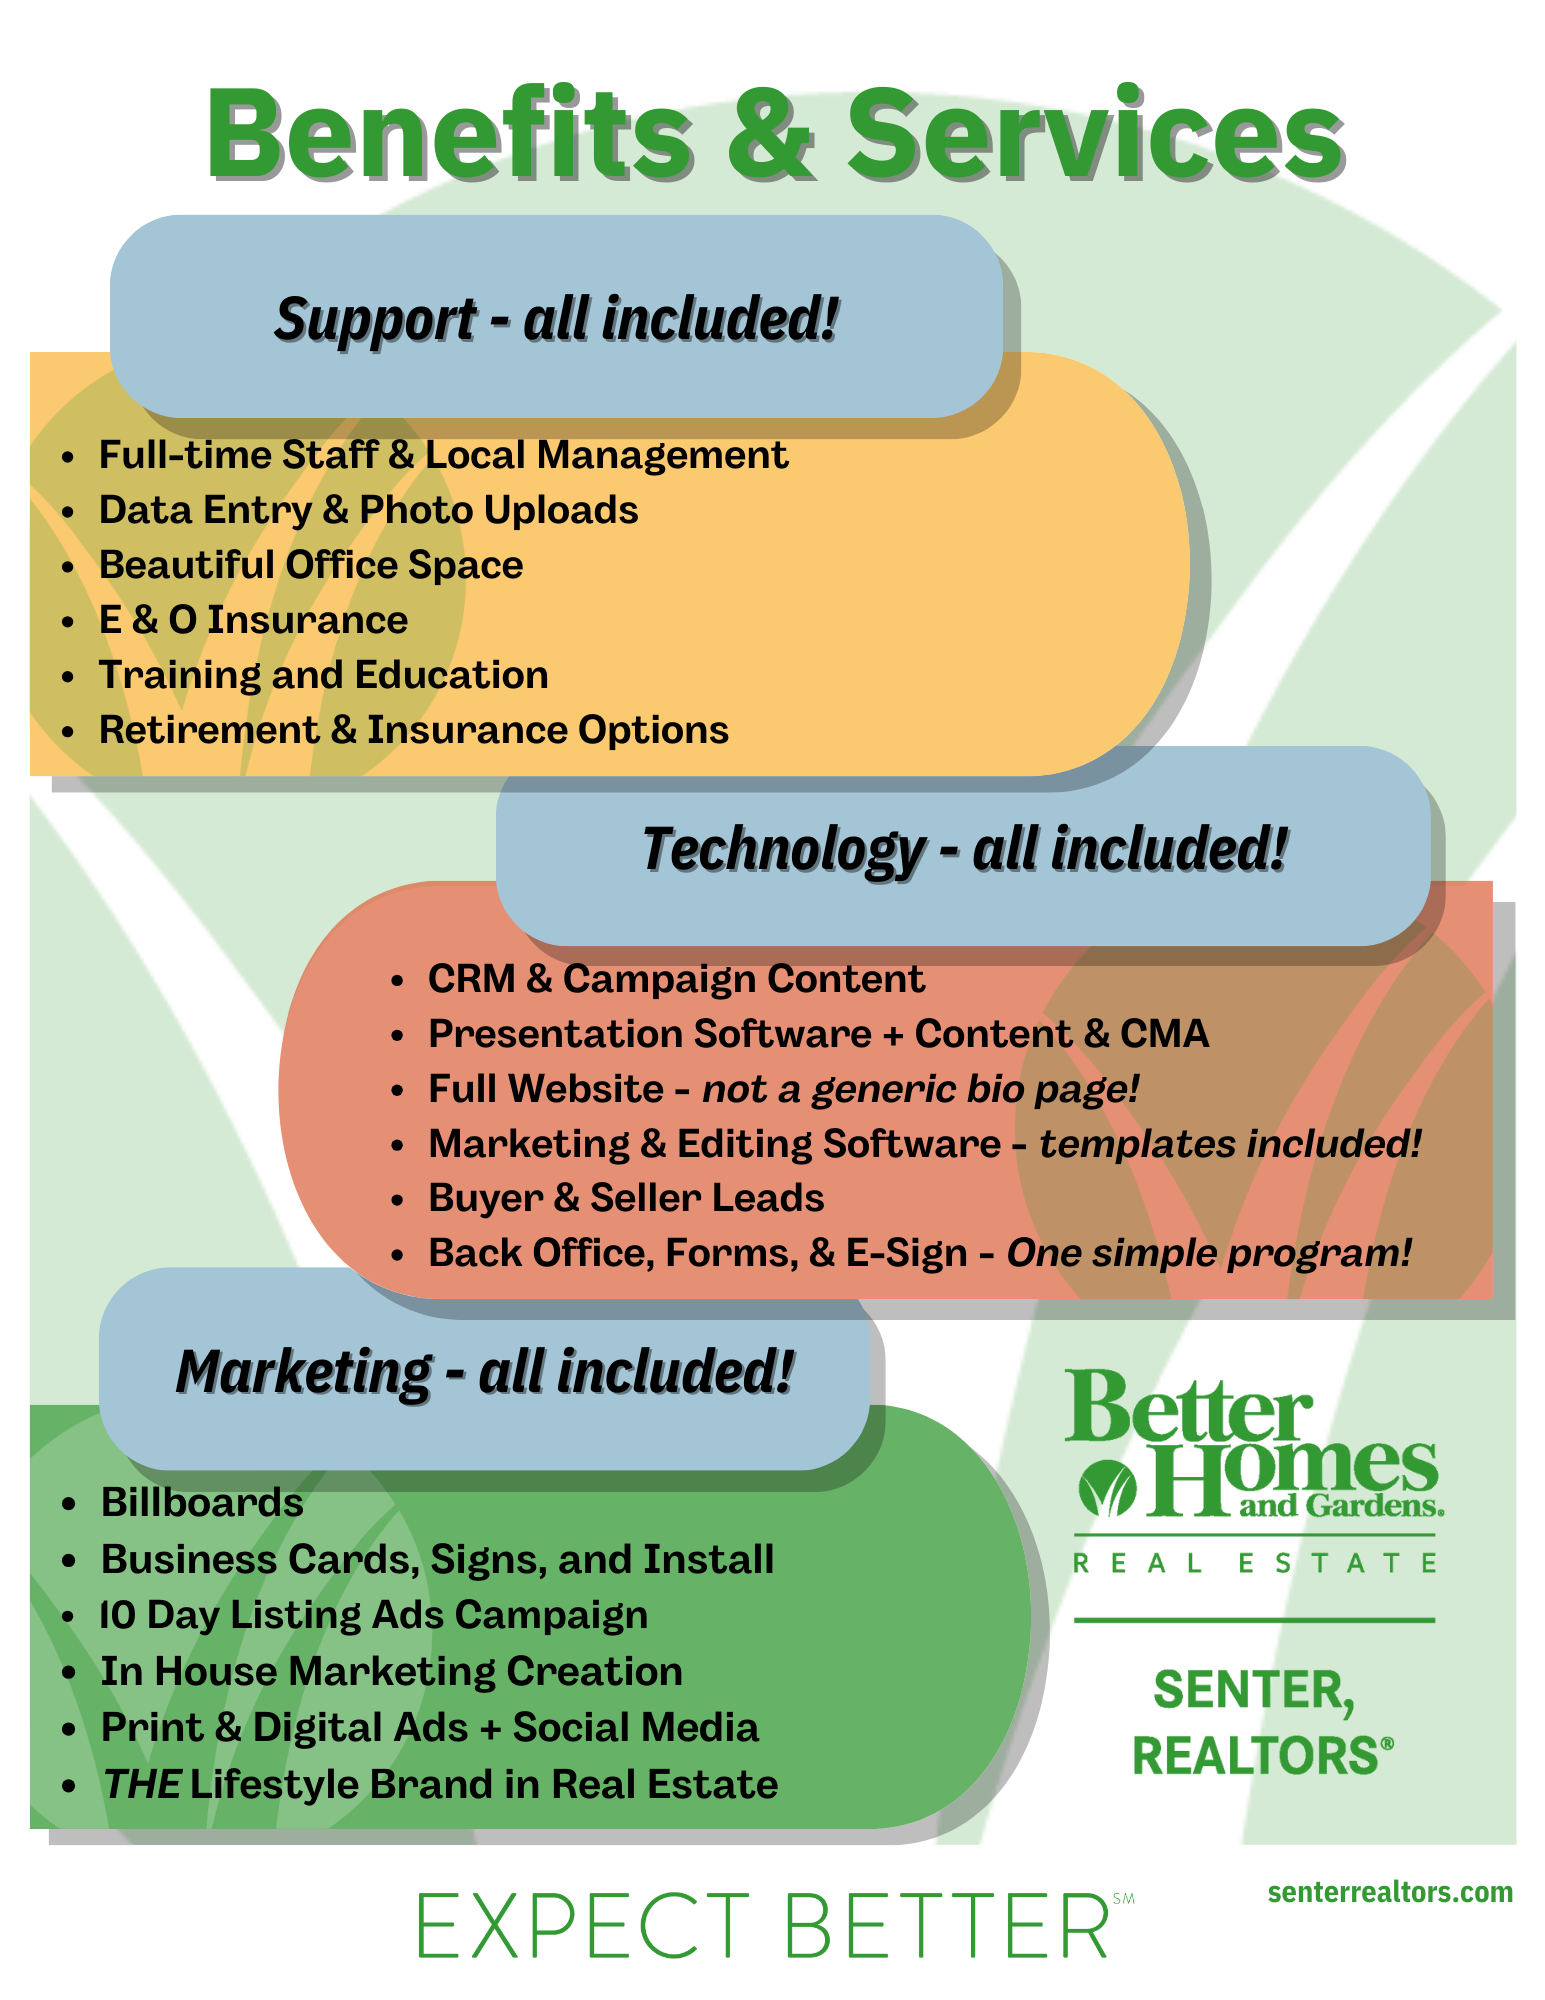 Flyer of career benefits and services offered at BHGRE Senter, REALTORS